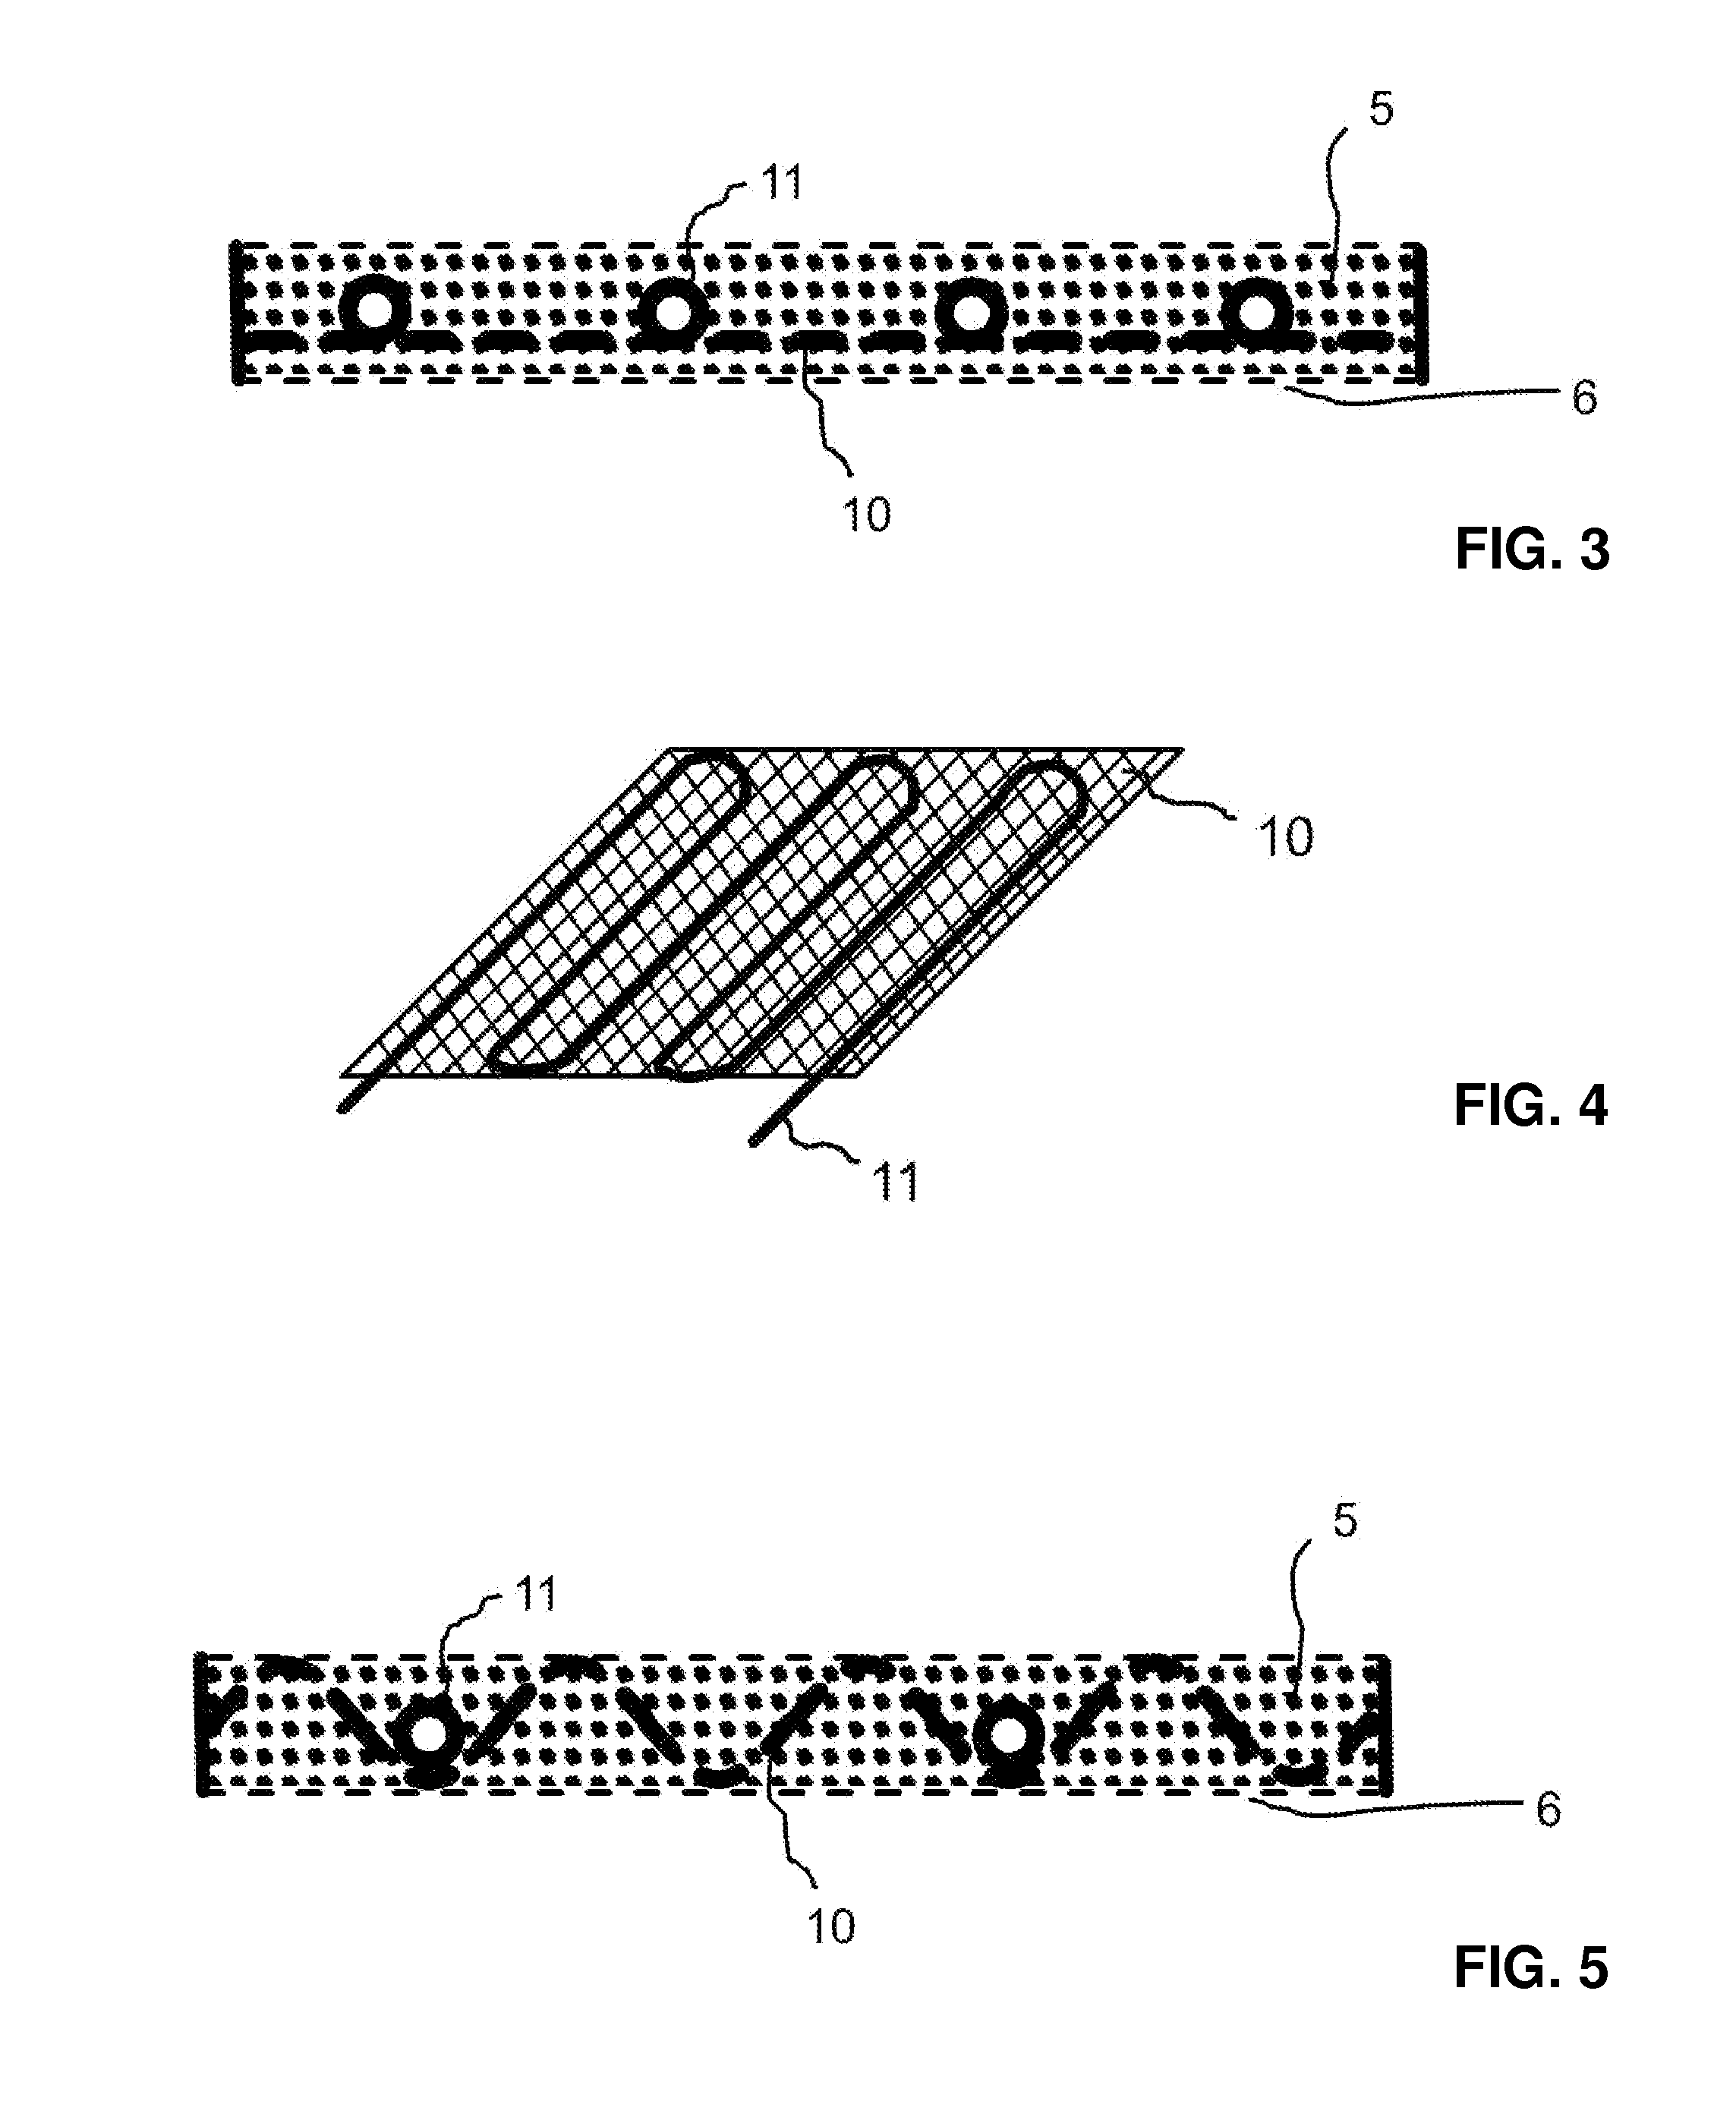 Low-pressure drop structure of particle adsorbent bed for adsorption gas separation process